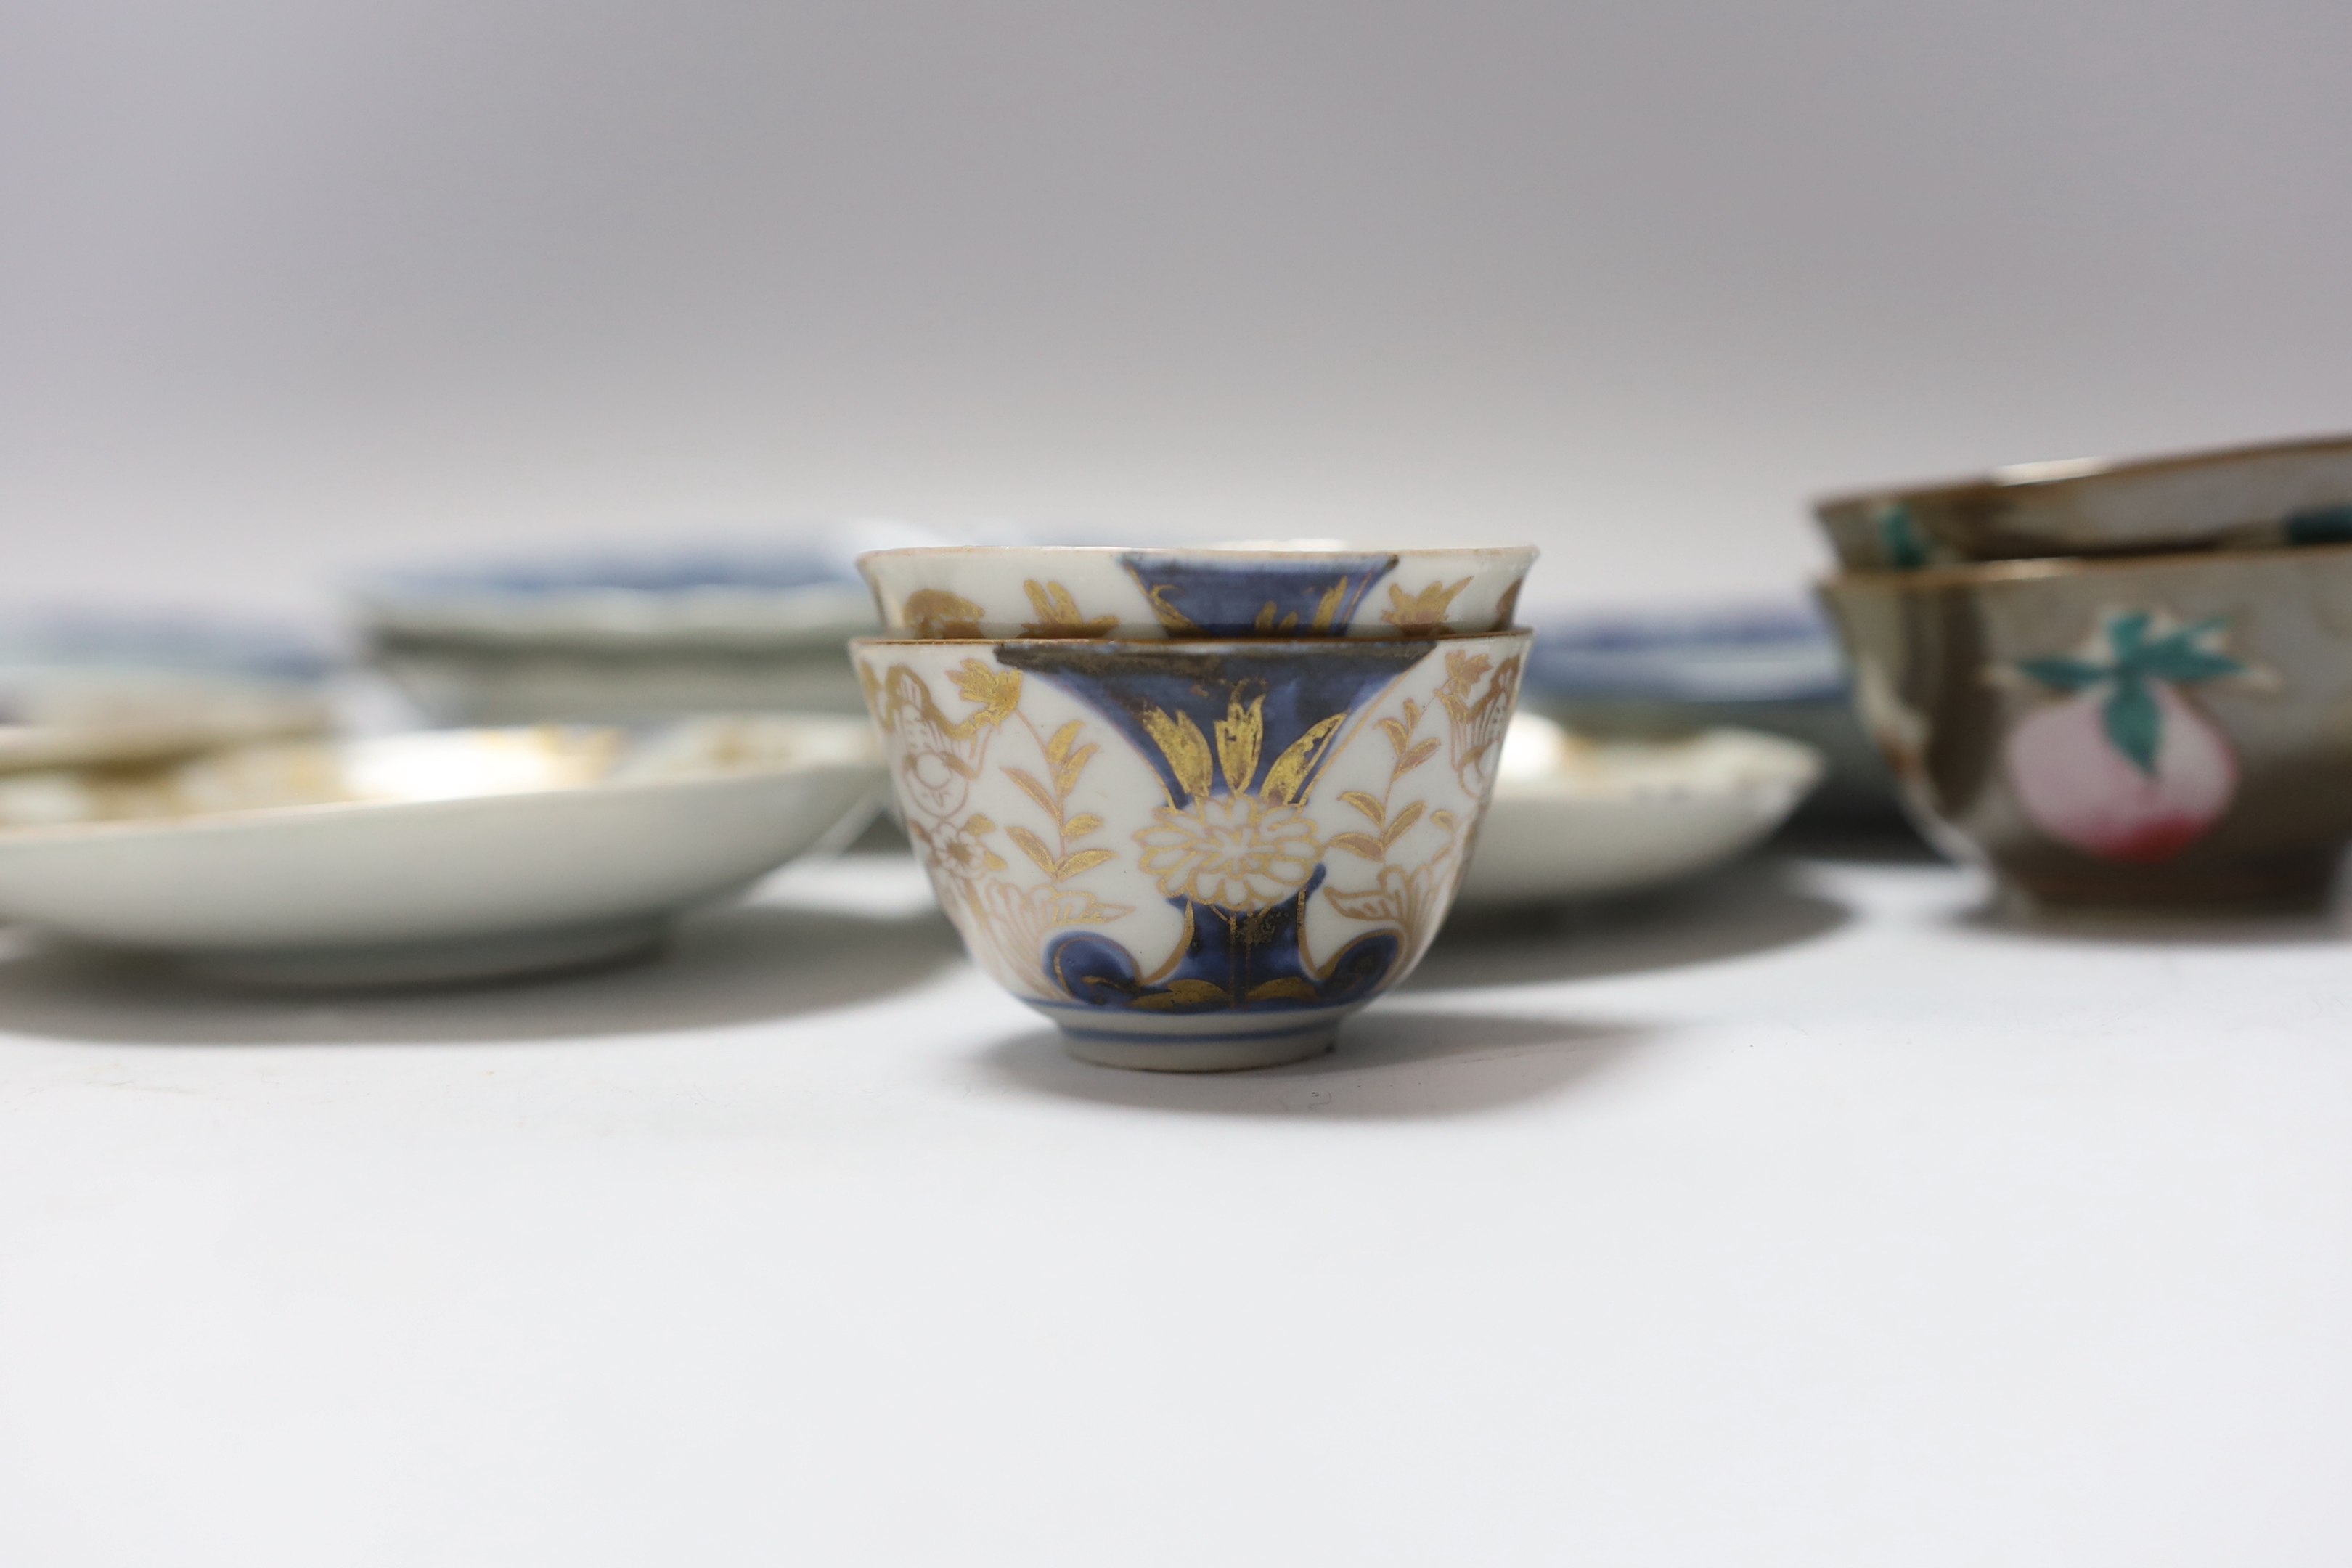 Four 18th century Japanese teabowls with three matching saucers, two 19th century Chinese cafe au lait glazed teabowls and four Chinese blue and white small dishes